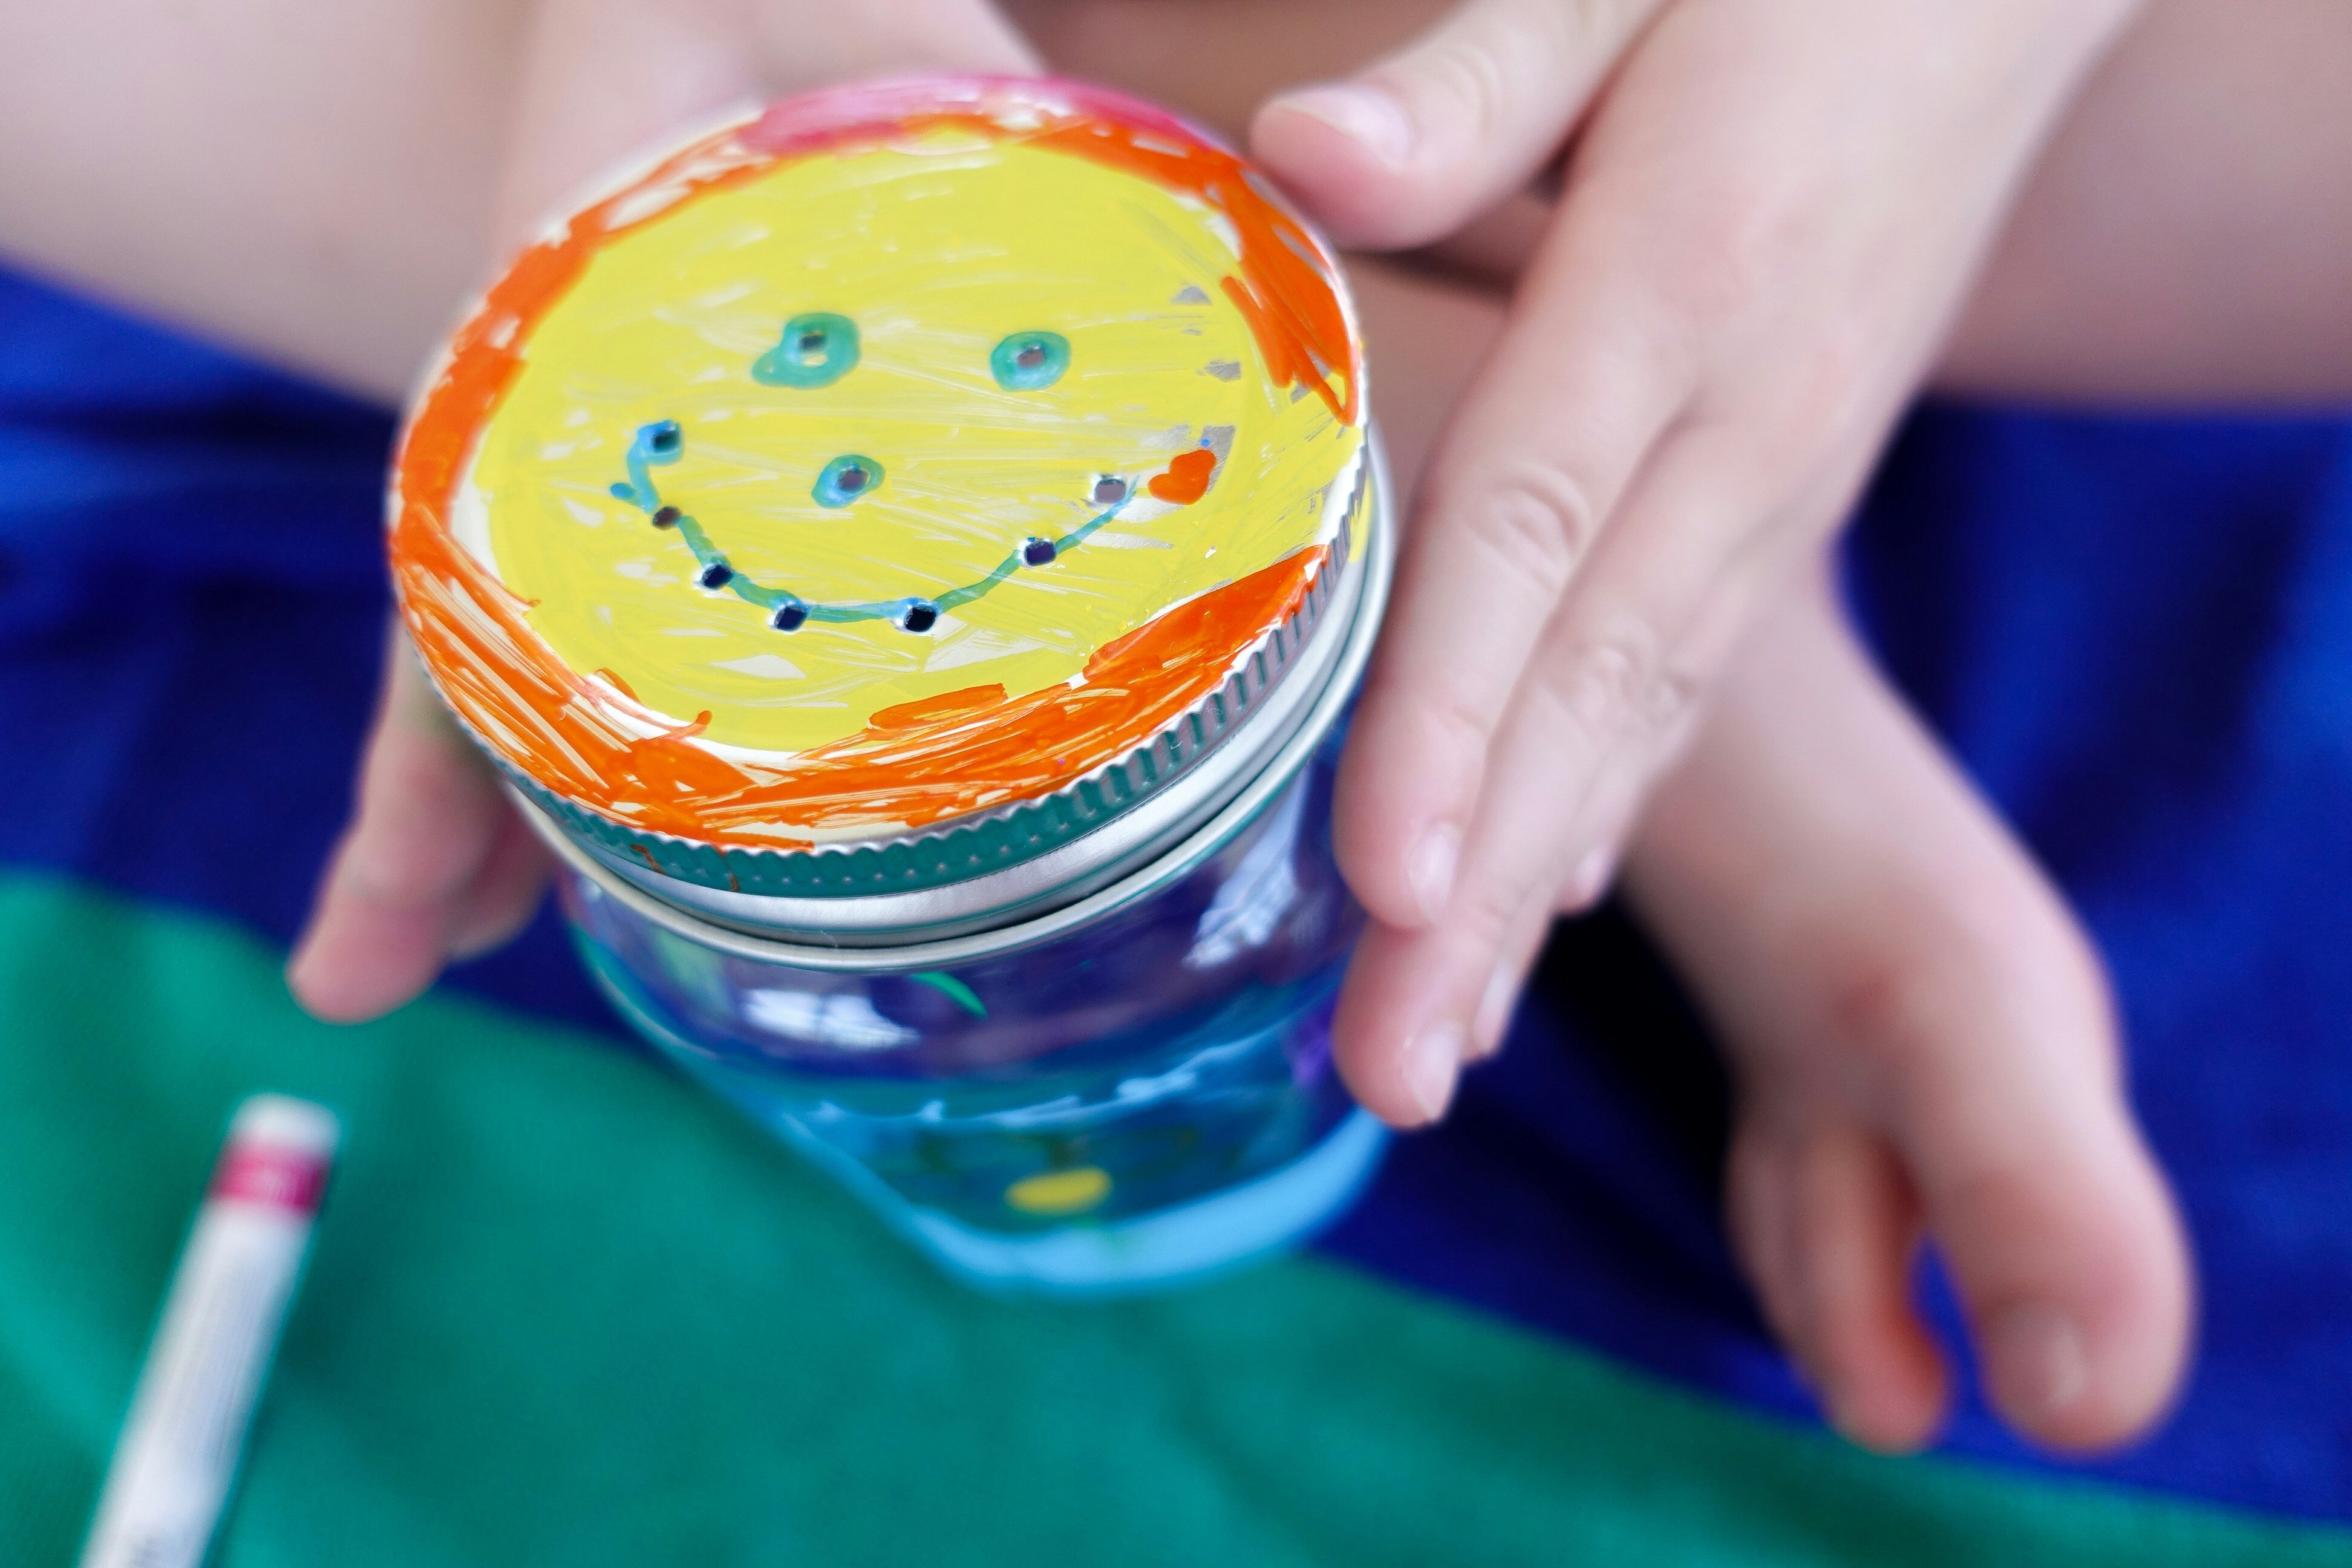 Kid Crafts - DIY Firefly & Collection Jars - South Lumina Style